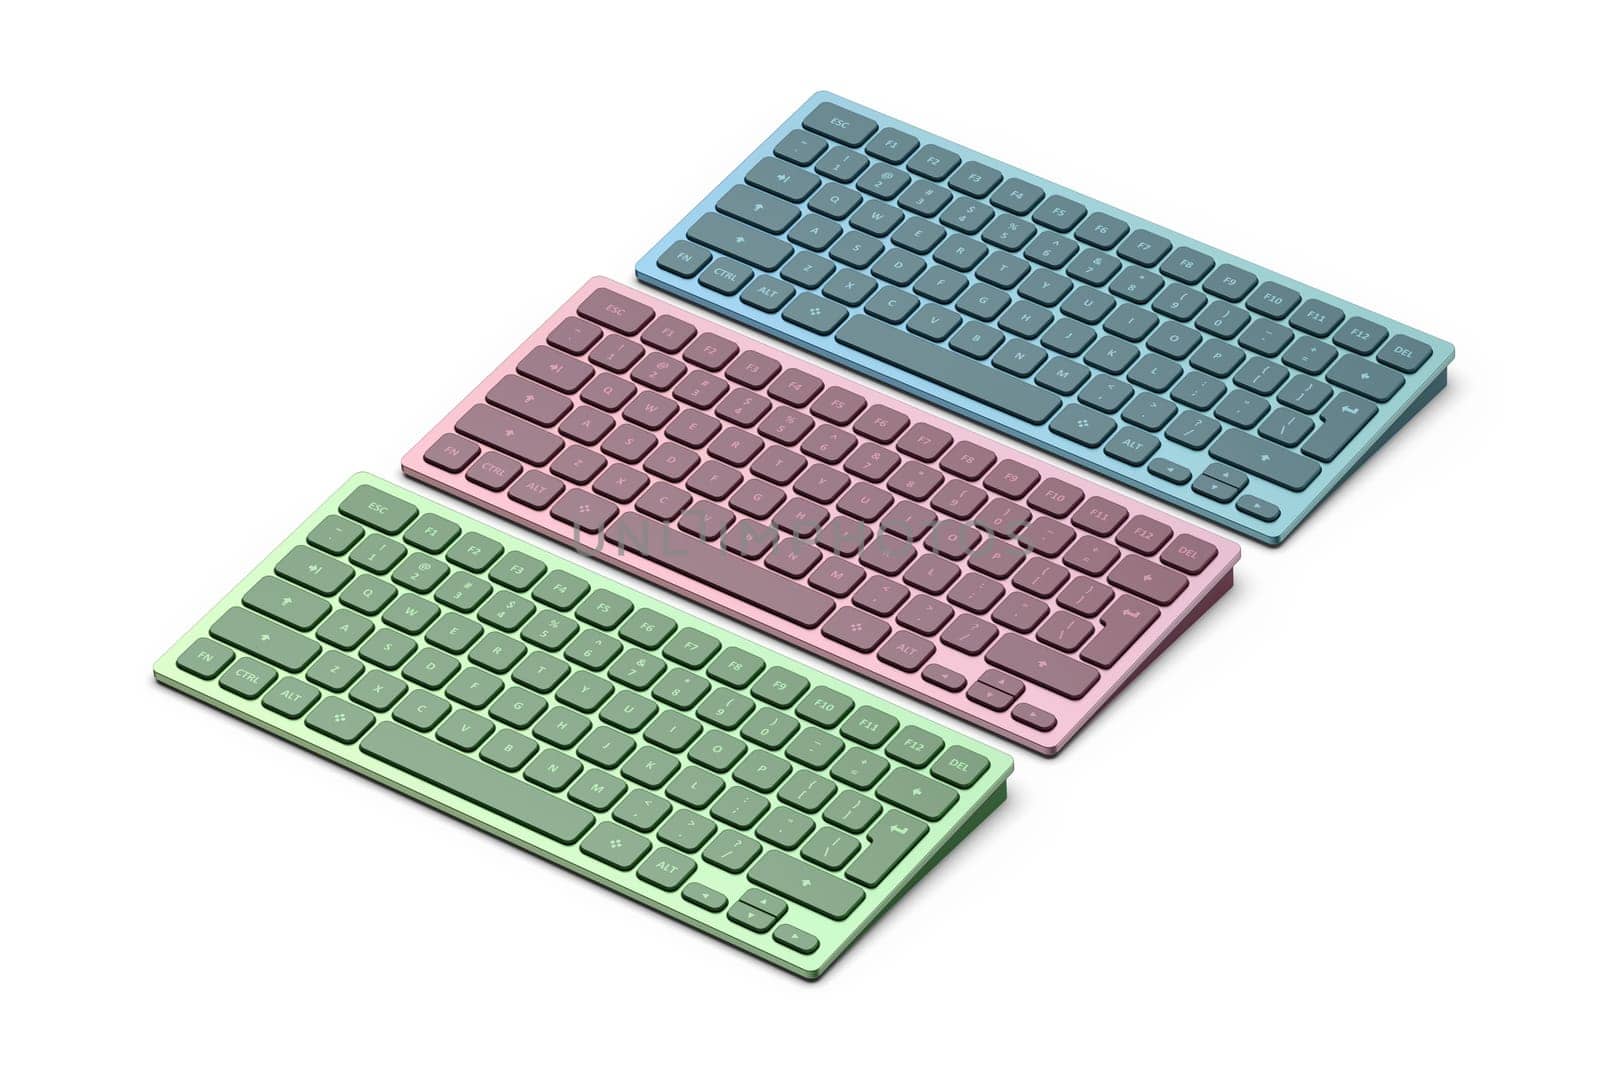 Wireless computer keyboards with different colors by magraphics